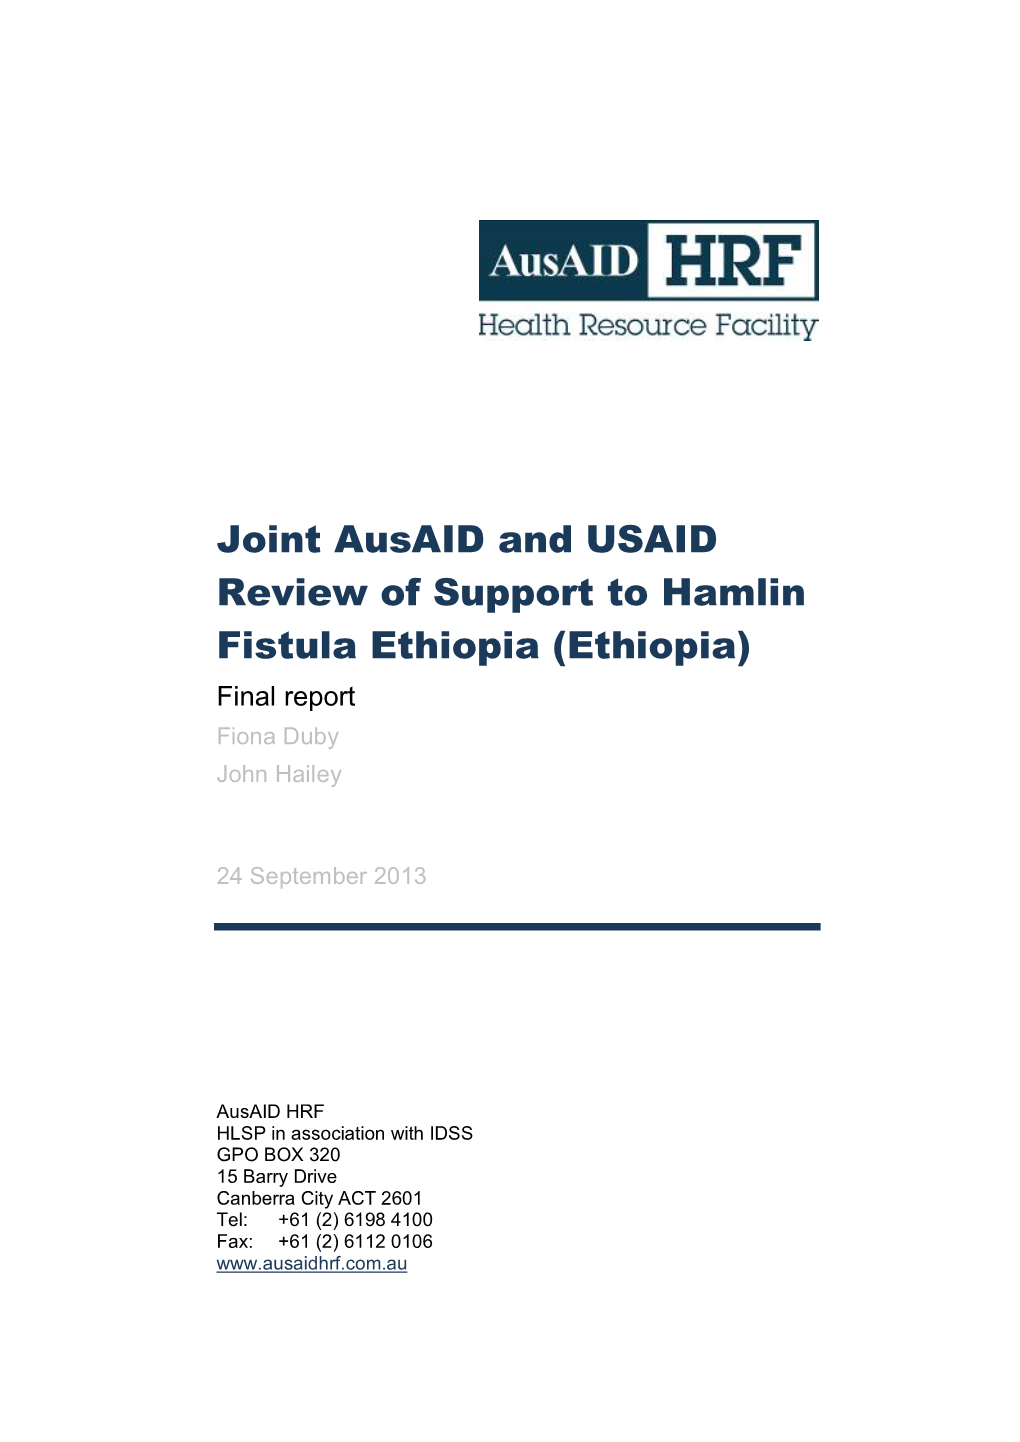 Joint Ausaid and USAID Review of Support to Hamlin Fistula Ethiopia (Ethiopia) Final Report Fiona Duby John Hailey